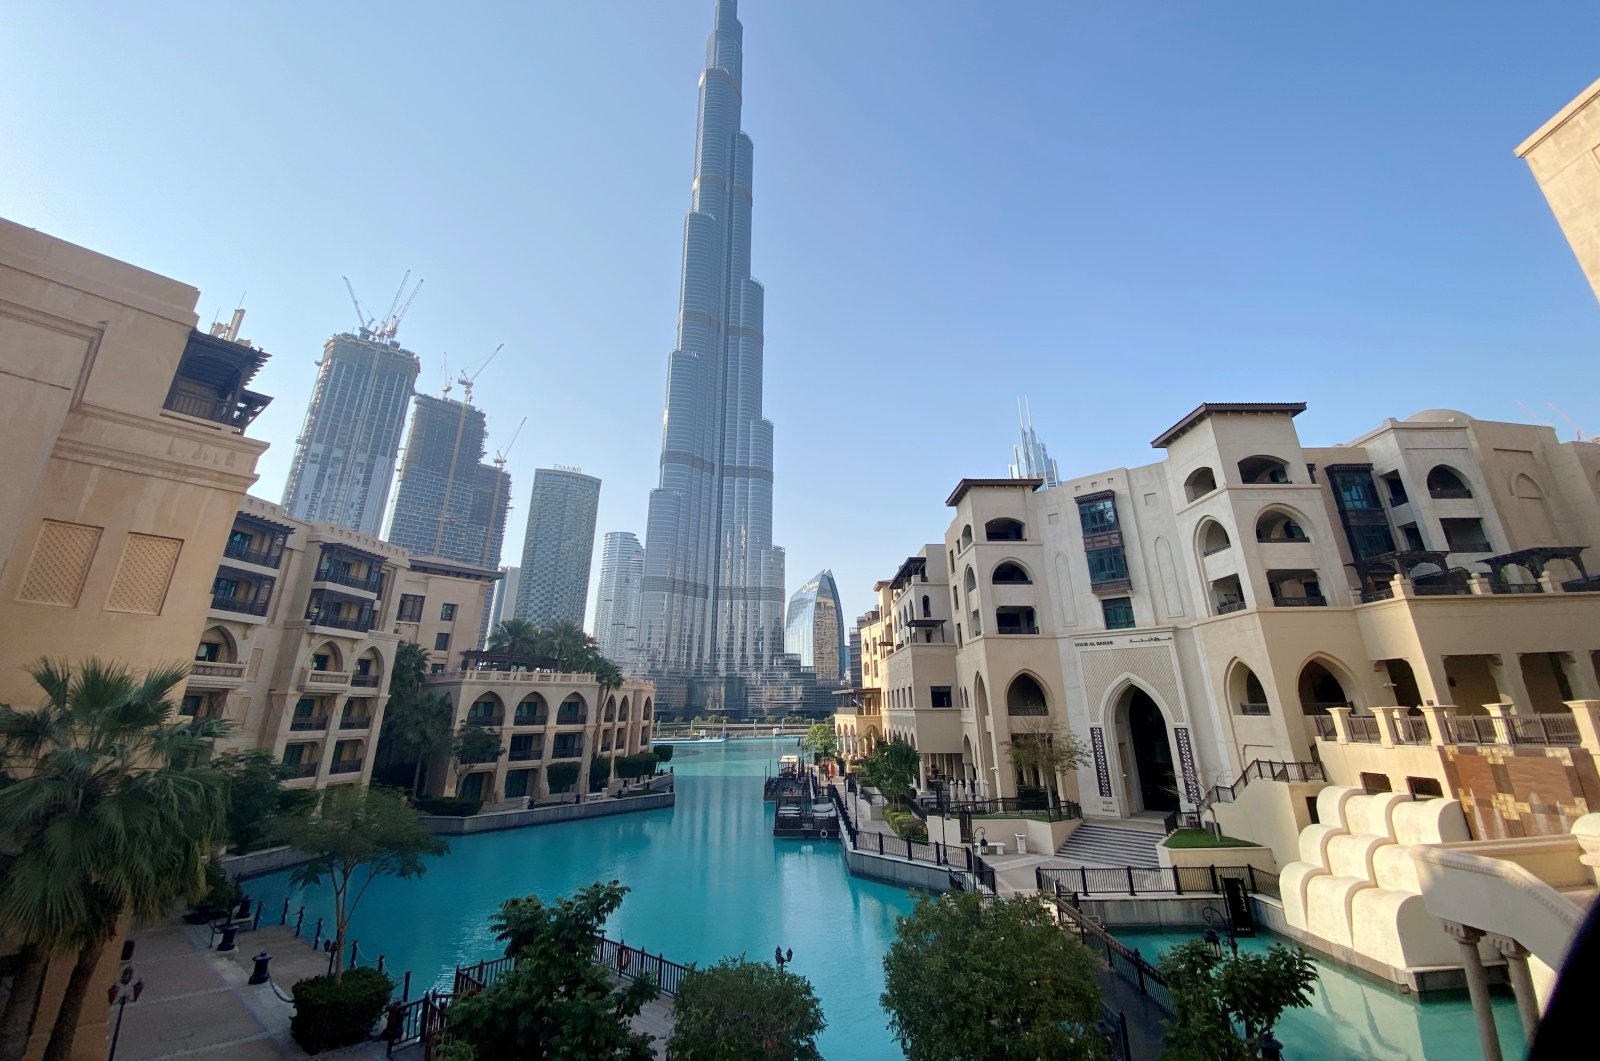 A general view shows the area outside the Burj Khalifa, the world's tallest building, mostly deserted, after a curfew was imposed to prevent the spread of the coronavirus in Dubai, United Arab Emirates (UAE), March 25, 2020. (Reuters Photo)